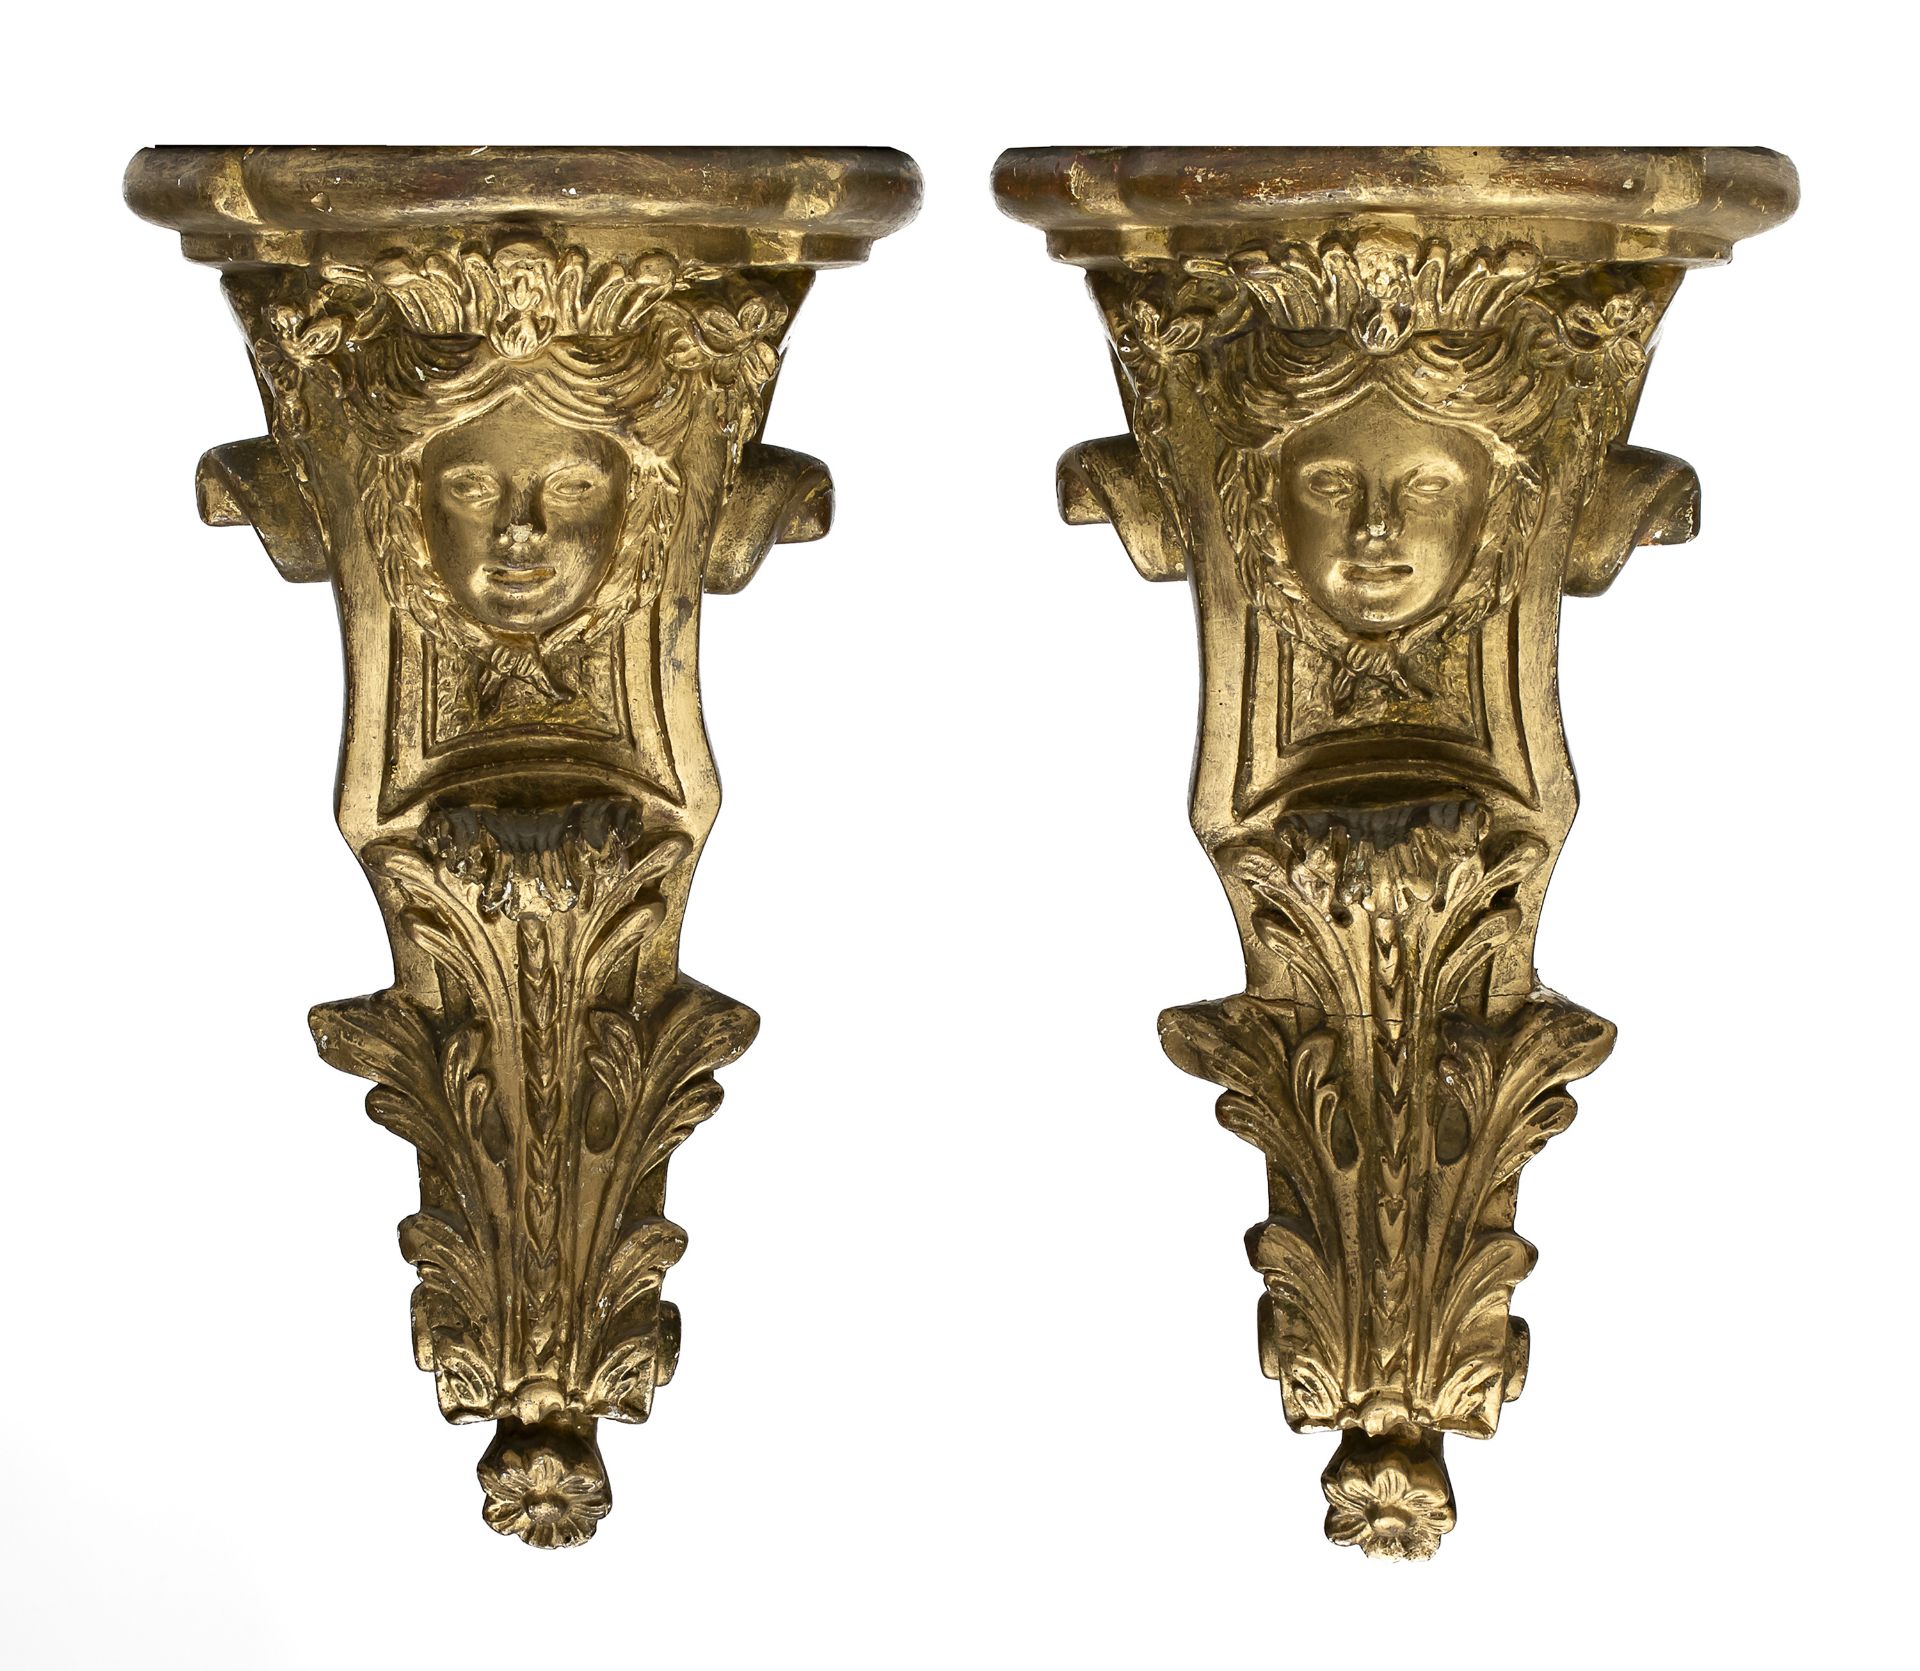 PAIR OF STUCCO SHELVES END OF THE 19TH CENTURY